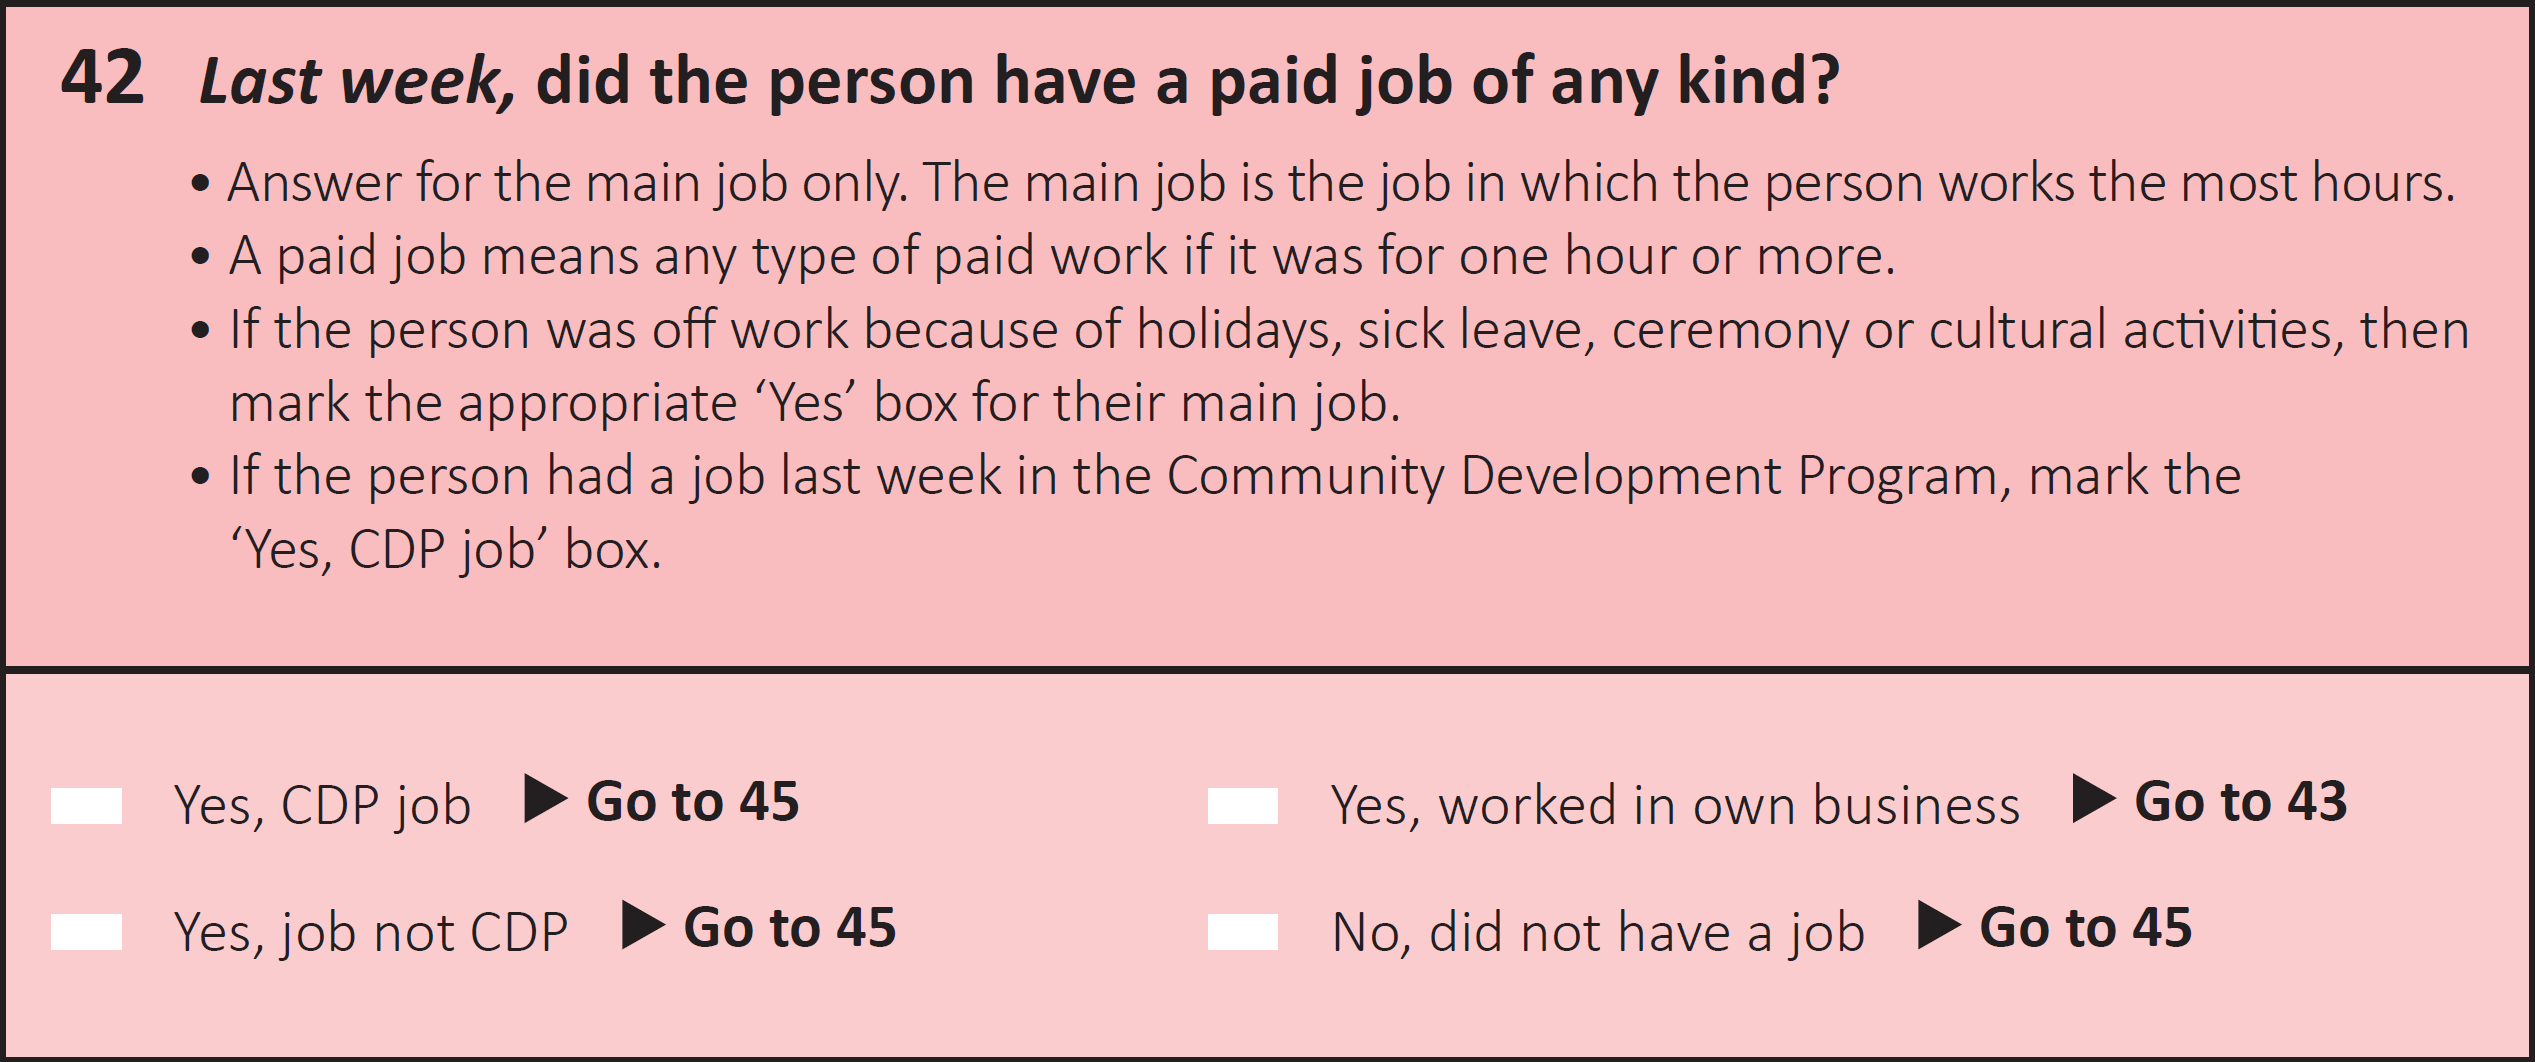 Last week, did the person have a paid job of any kind? 